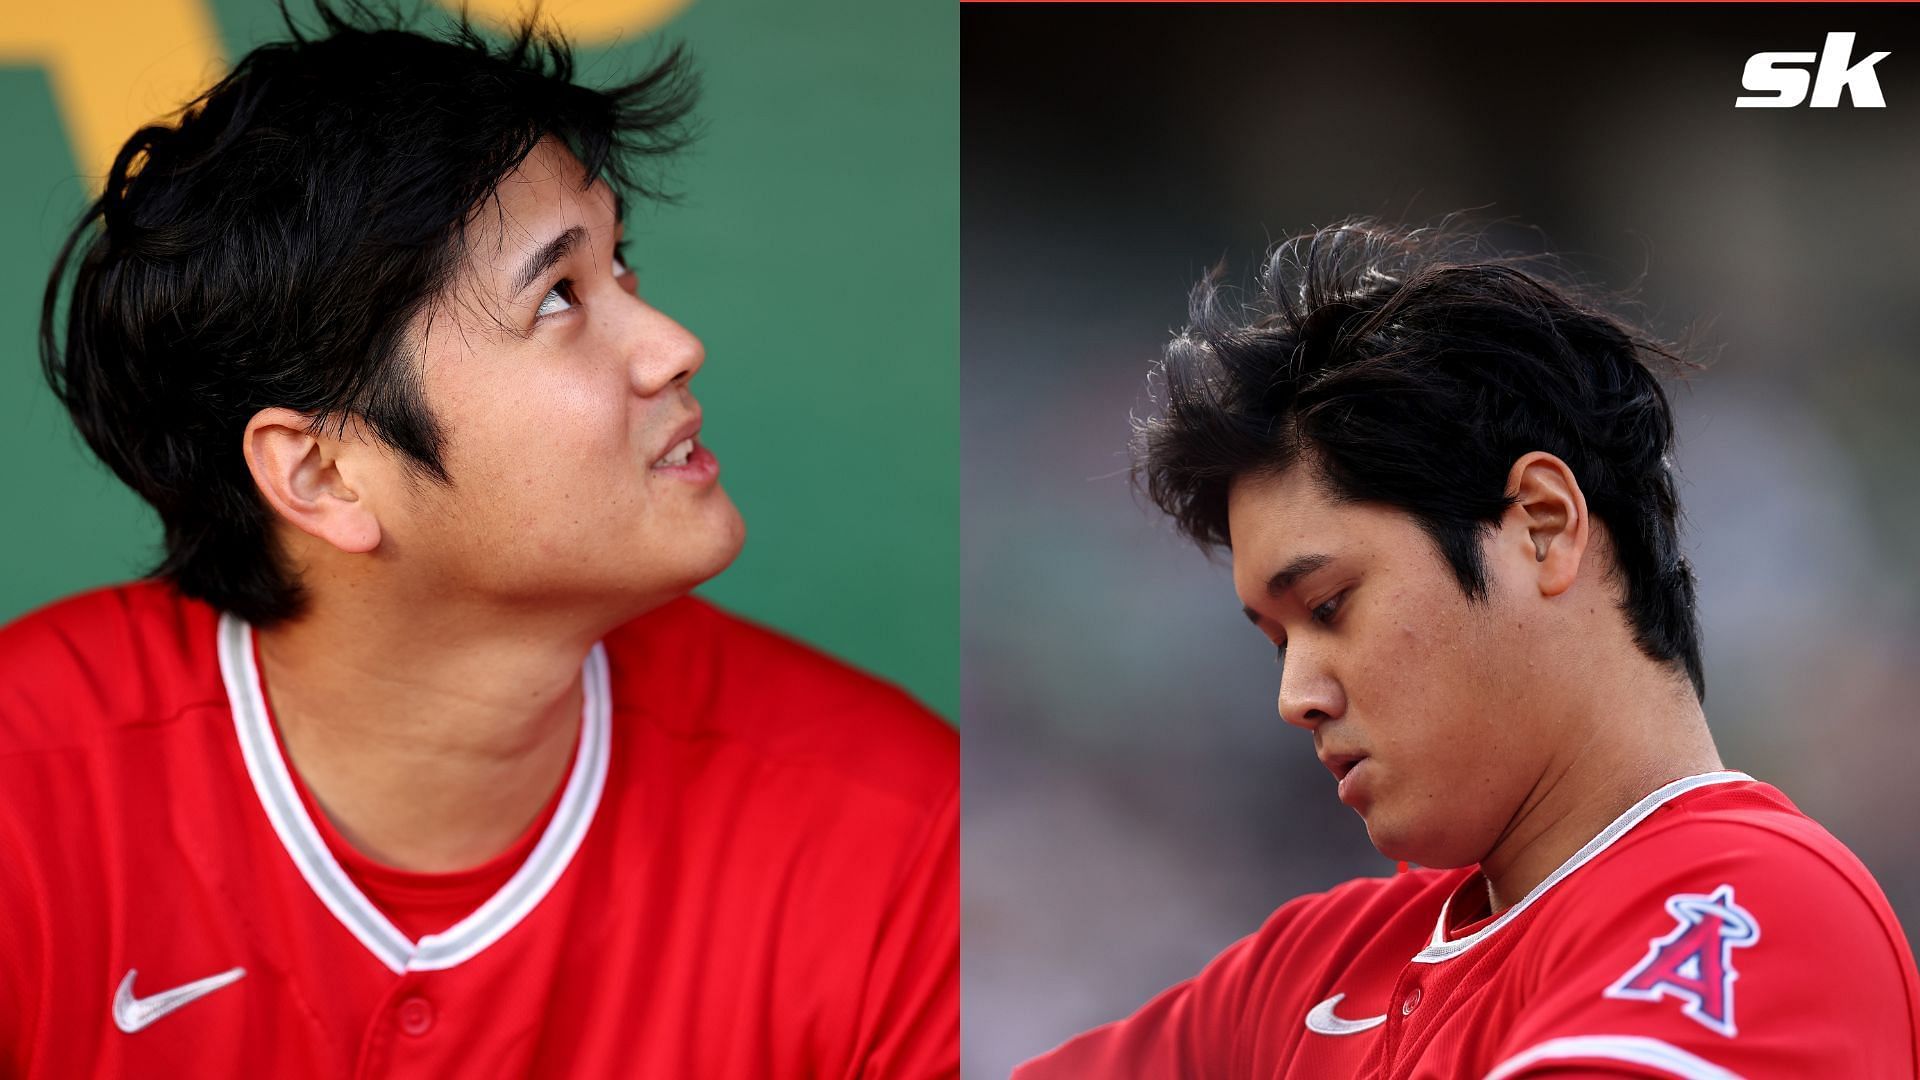 Shohei Ohtani discussed his love of baseball in an ESPN documentary